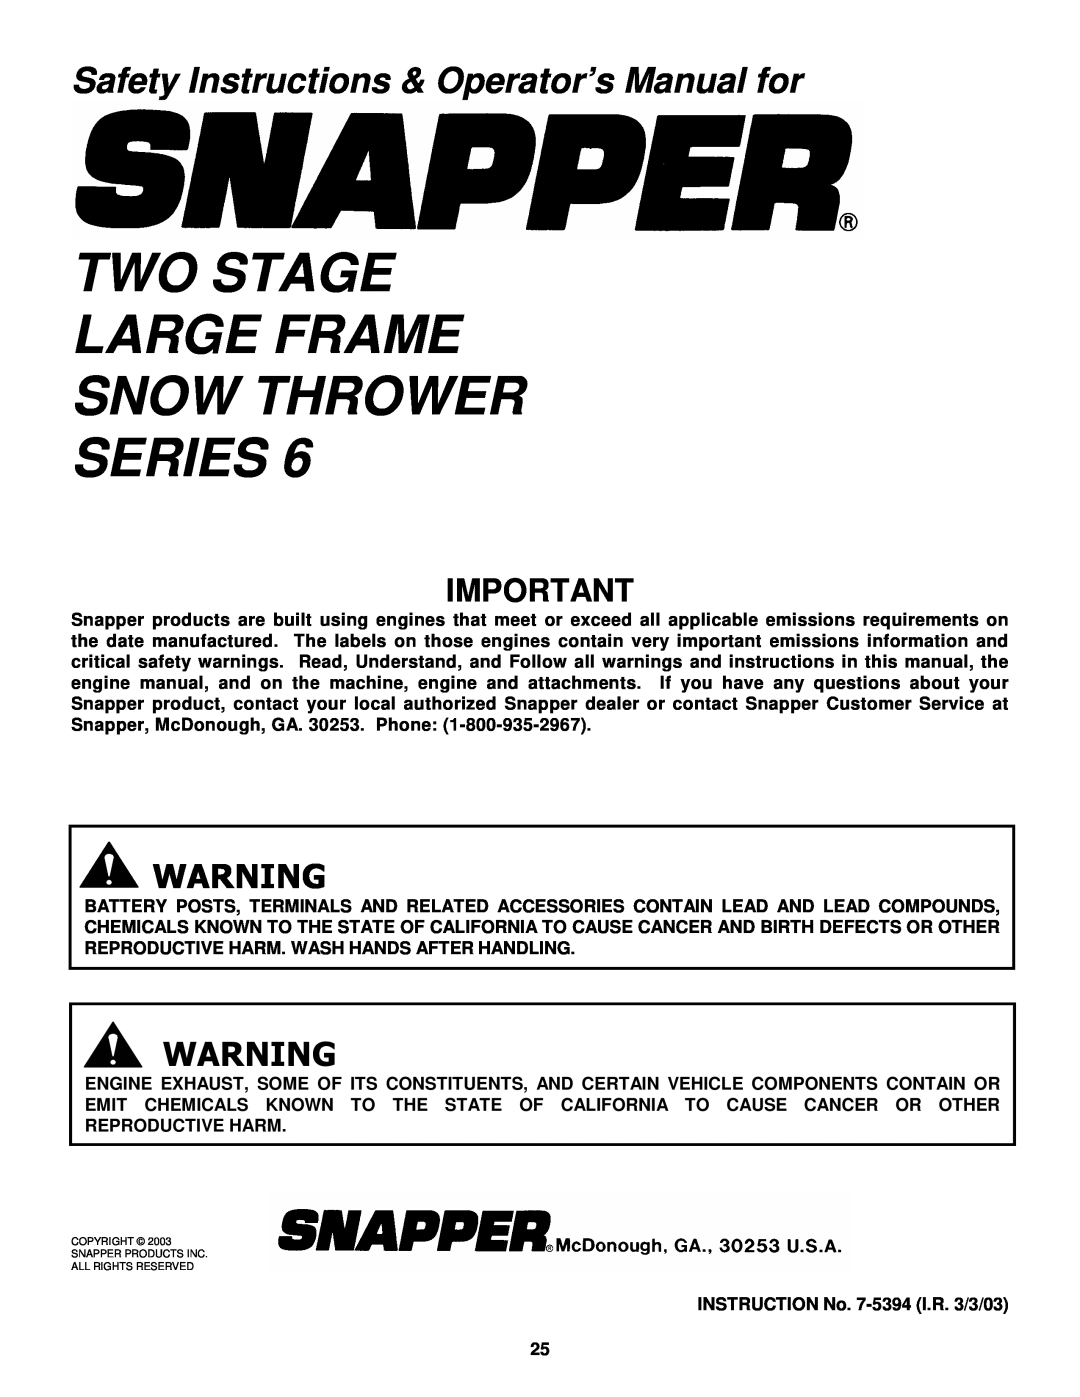 Snapper 8246, 9266, 9266E, E9266, 11306, E11306, 8246, 9266E, 9266, 11306 Two Stage Large Frame Snow Thrower Series 